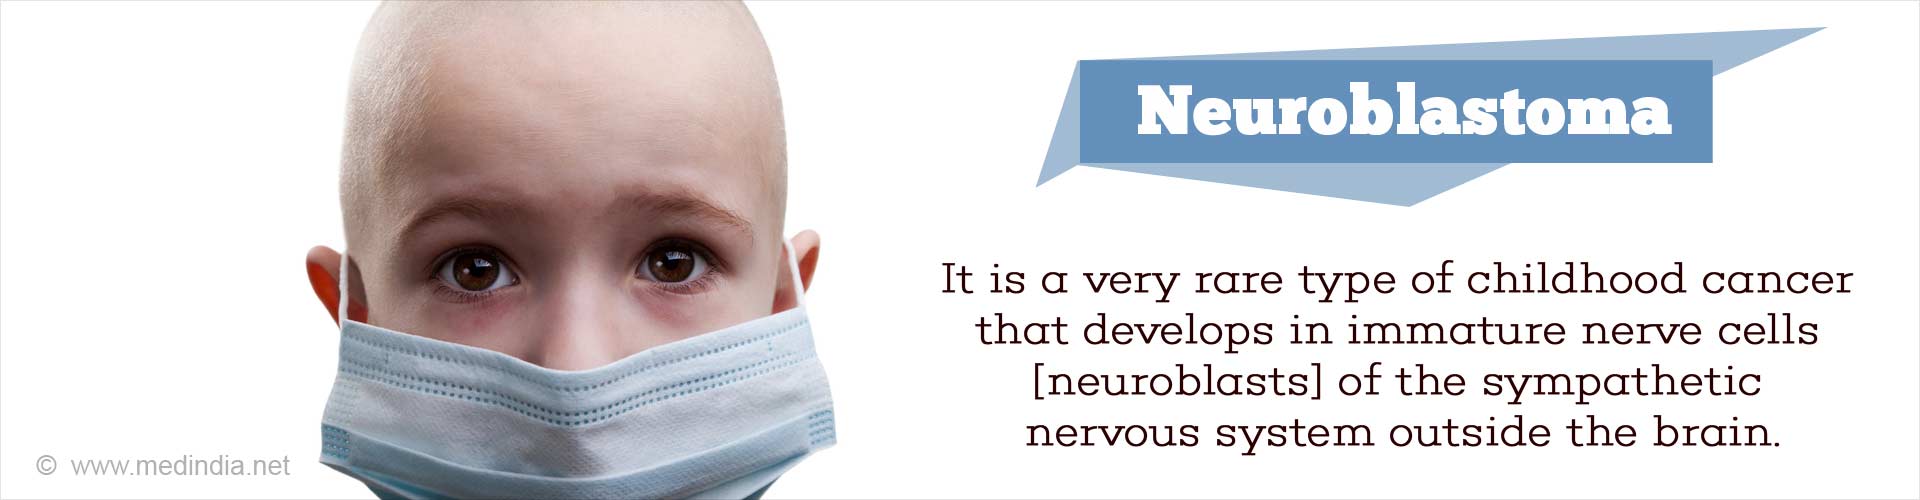 Neuroblastoma - It is a very rare type of childhood cancer that develops in immature nerve cells (neuroblasts) of the sympathetic nervous system outside the brain.